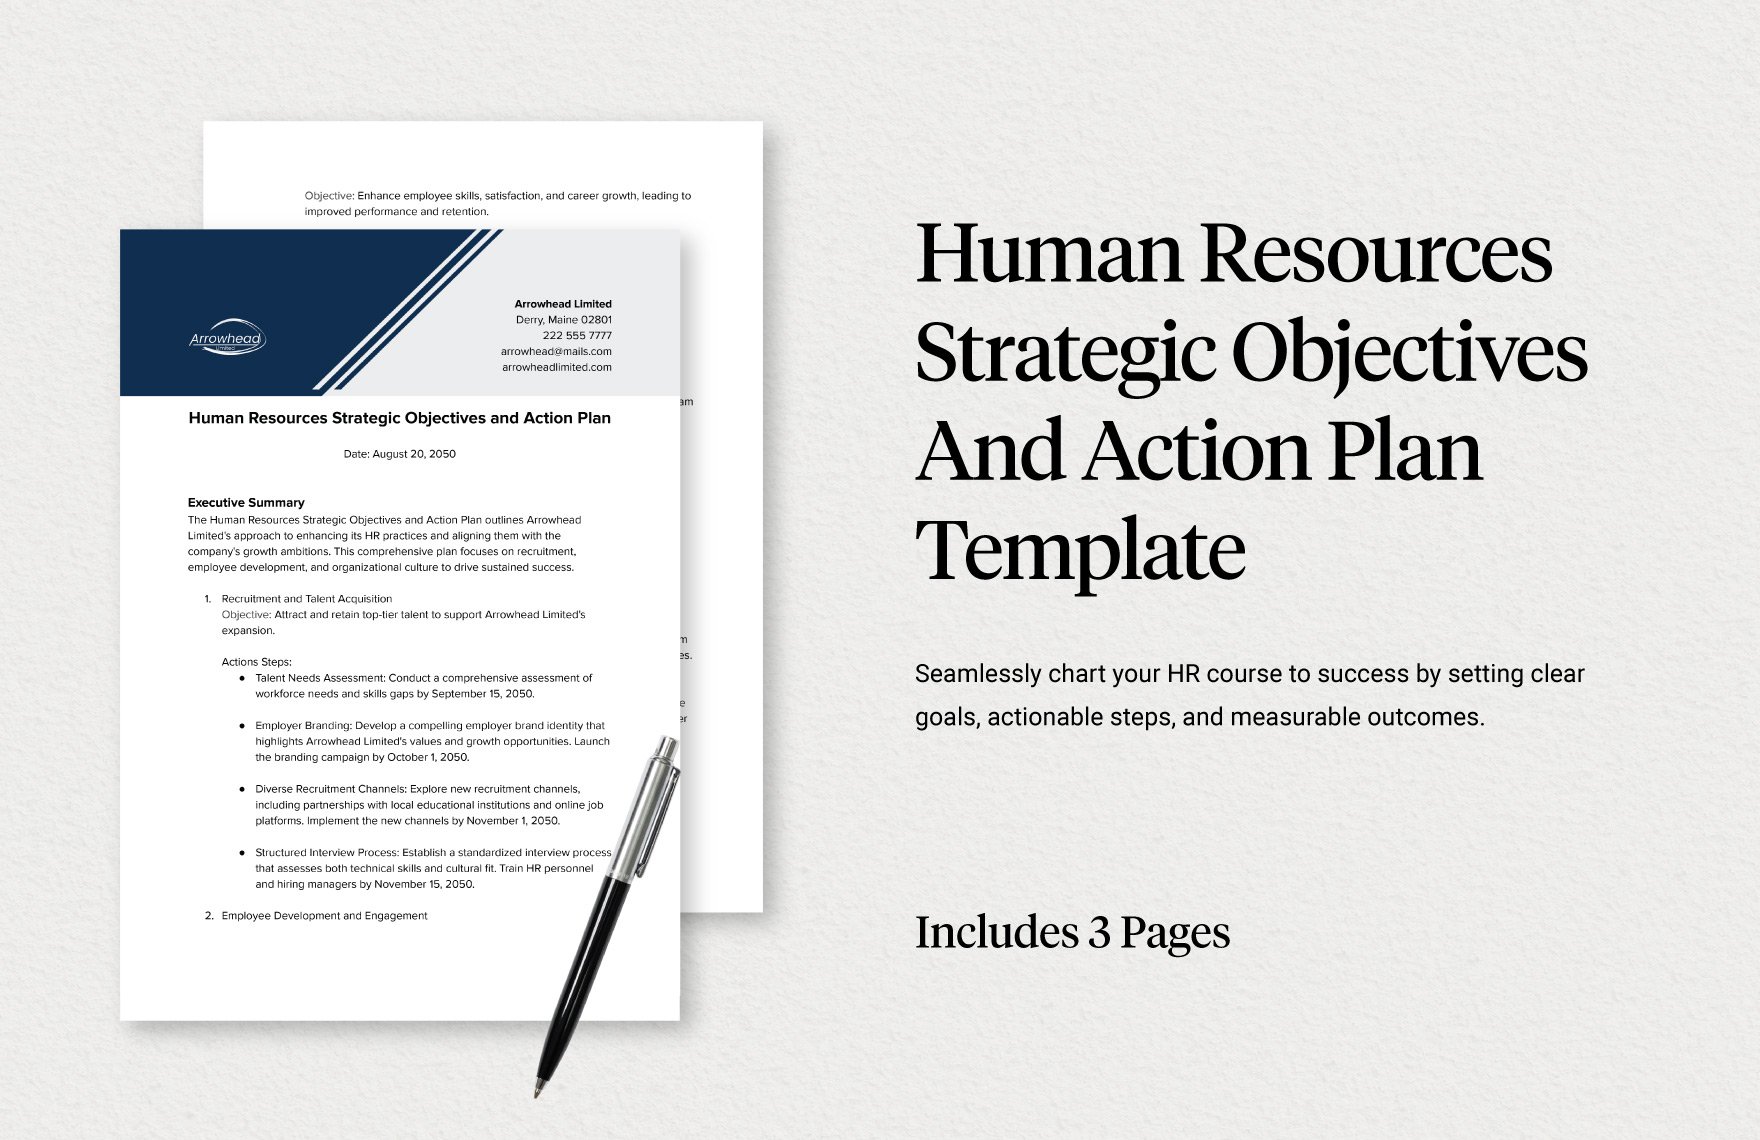 Human Resources Strategic Objectives And Action Plan Template